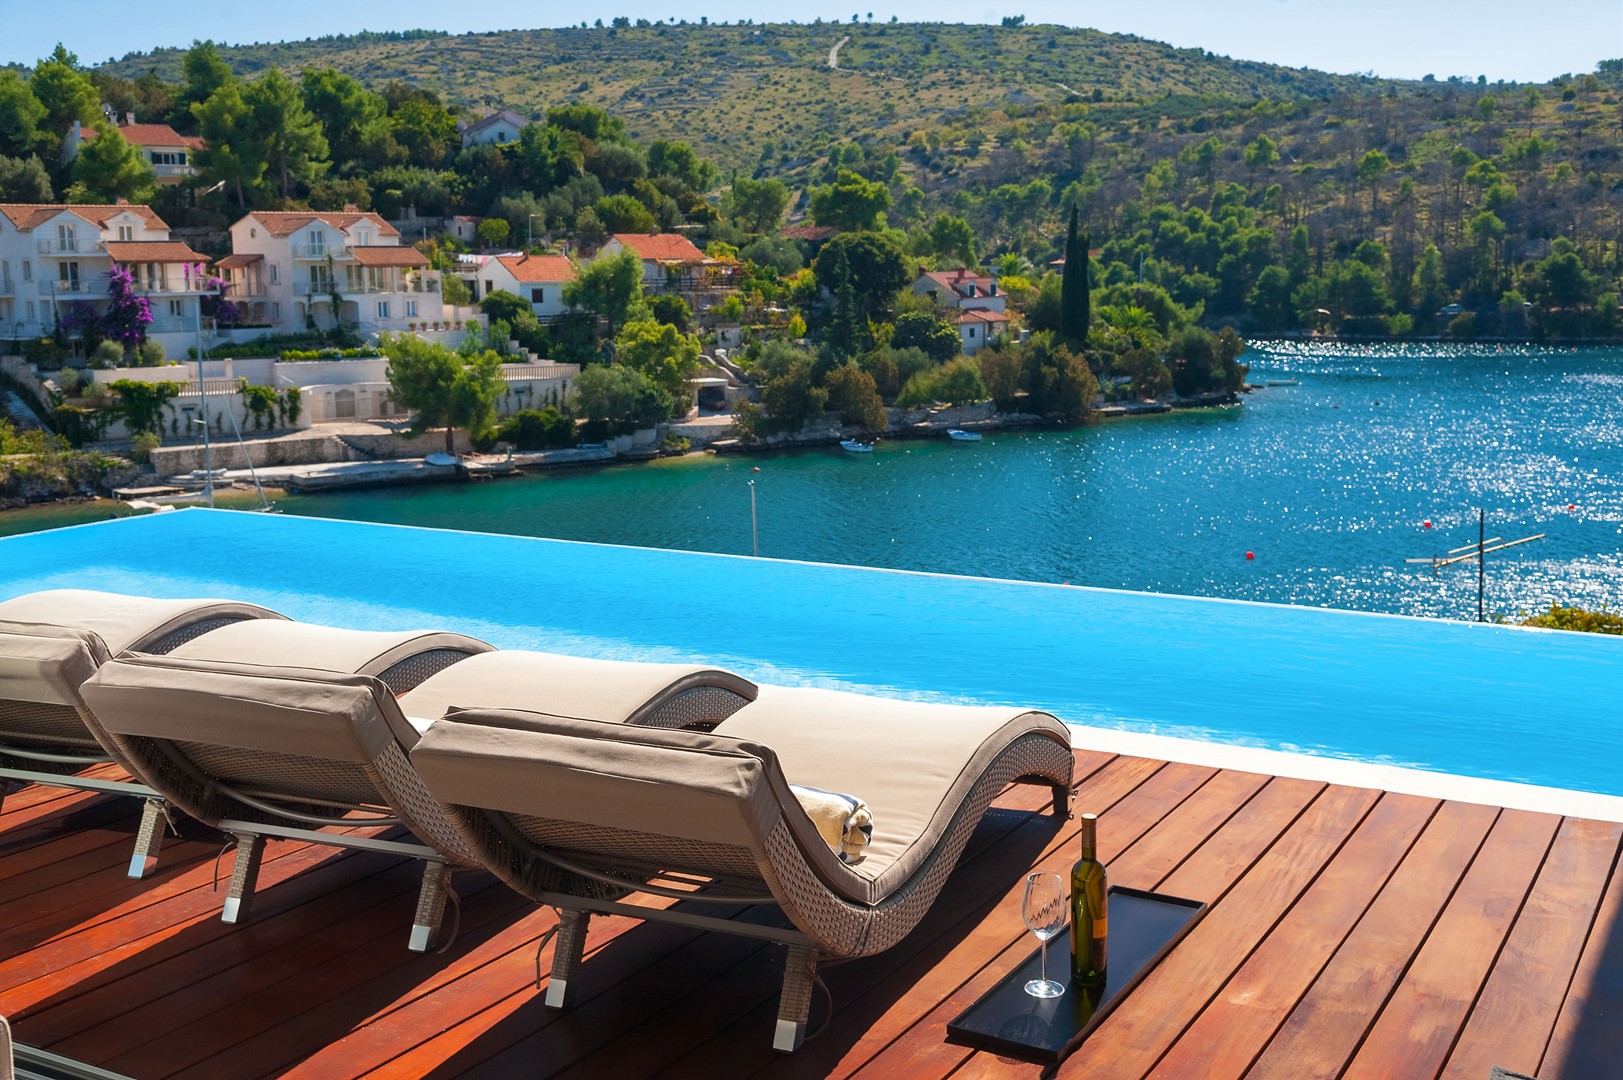 Panoramic sea view from the outdoor terrace of the luxury villa Blue Star of Brac on the island of Brac